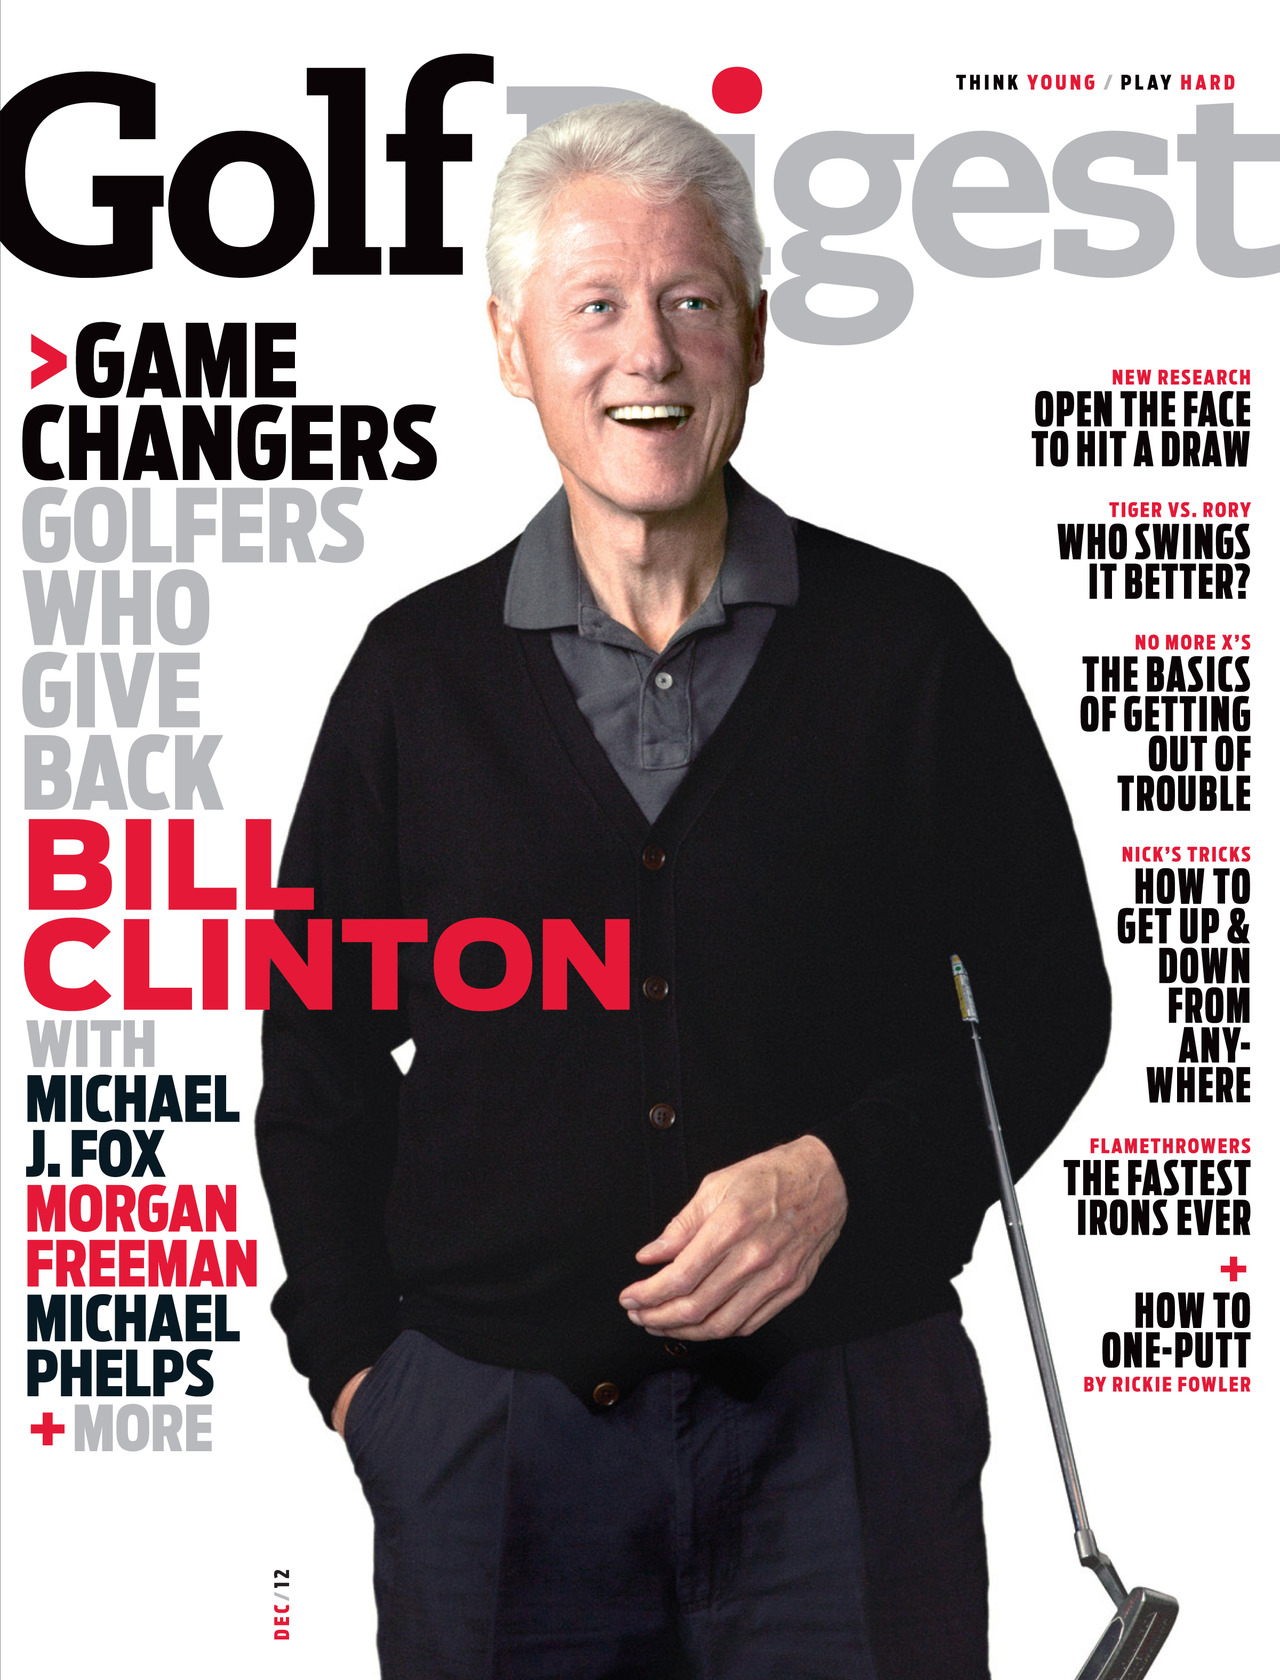 Two-Year Subscription to Golf Digest Magazine for $7.99